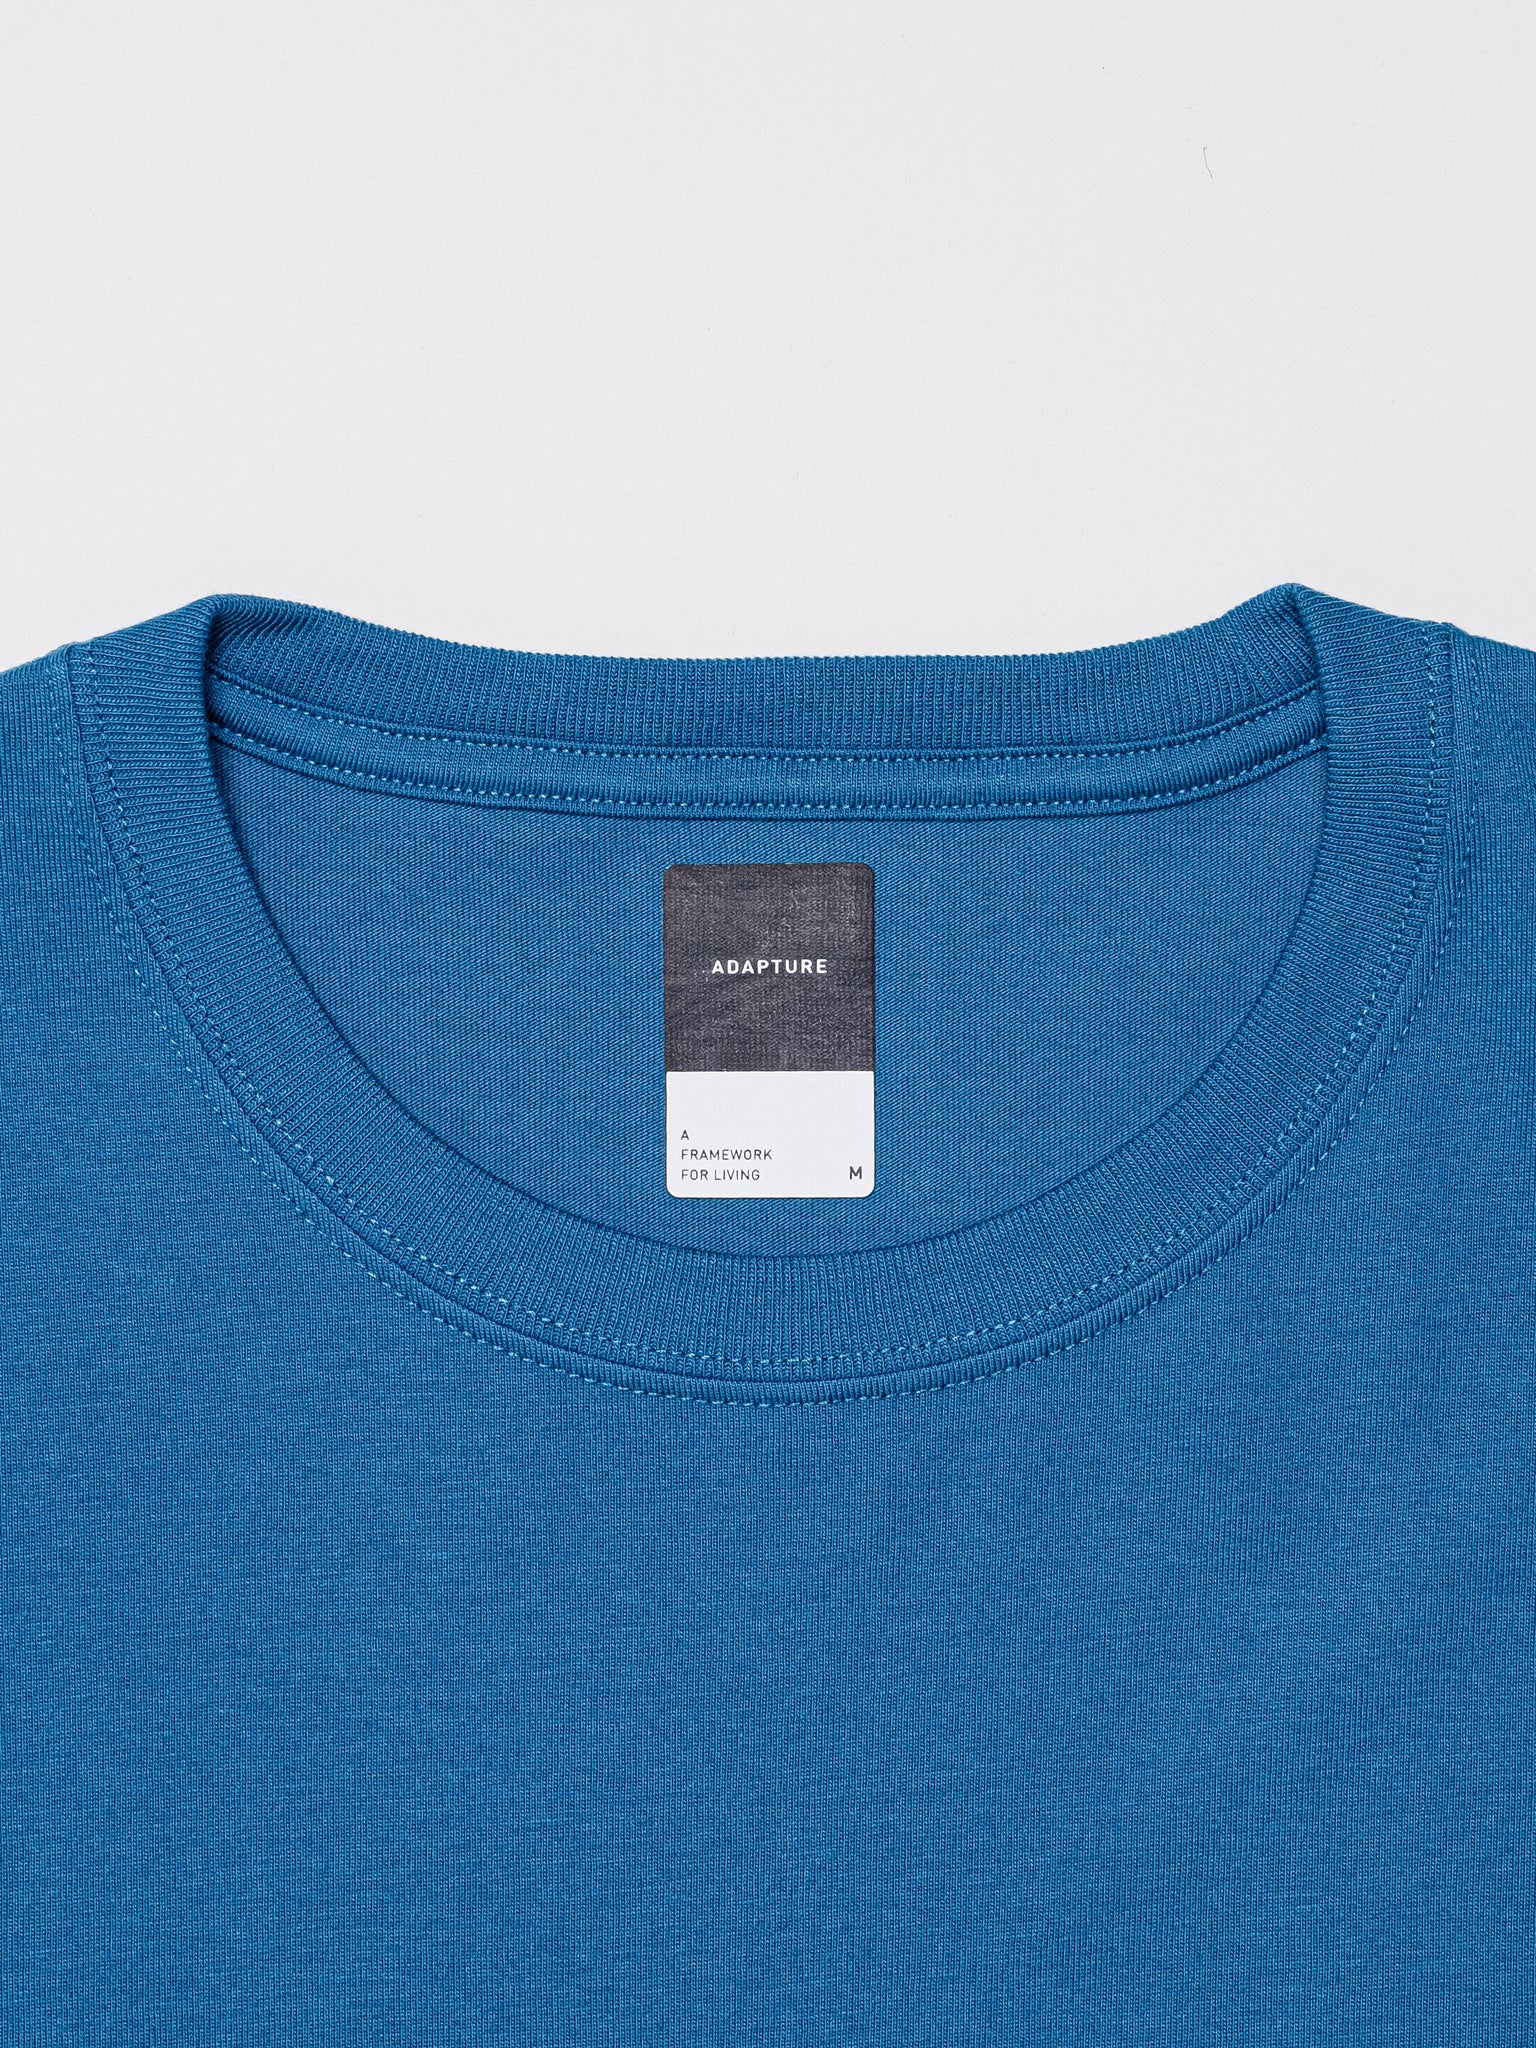 Relaxed Fit T-Shirt Lyons Blue - v2